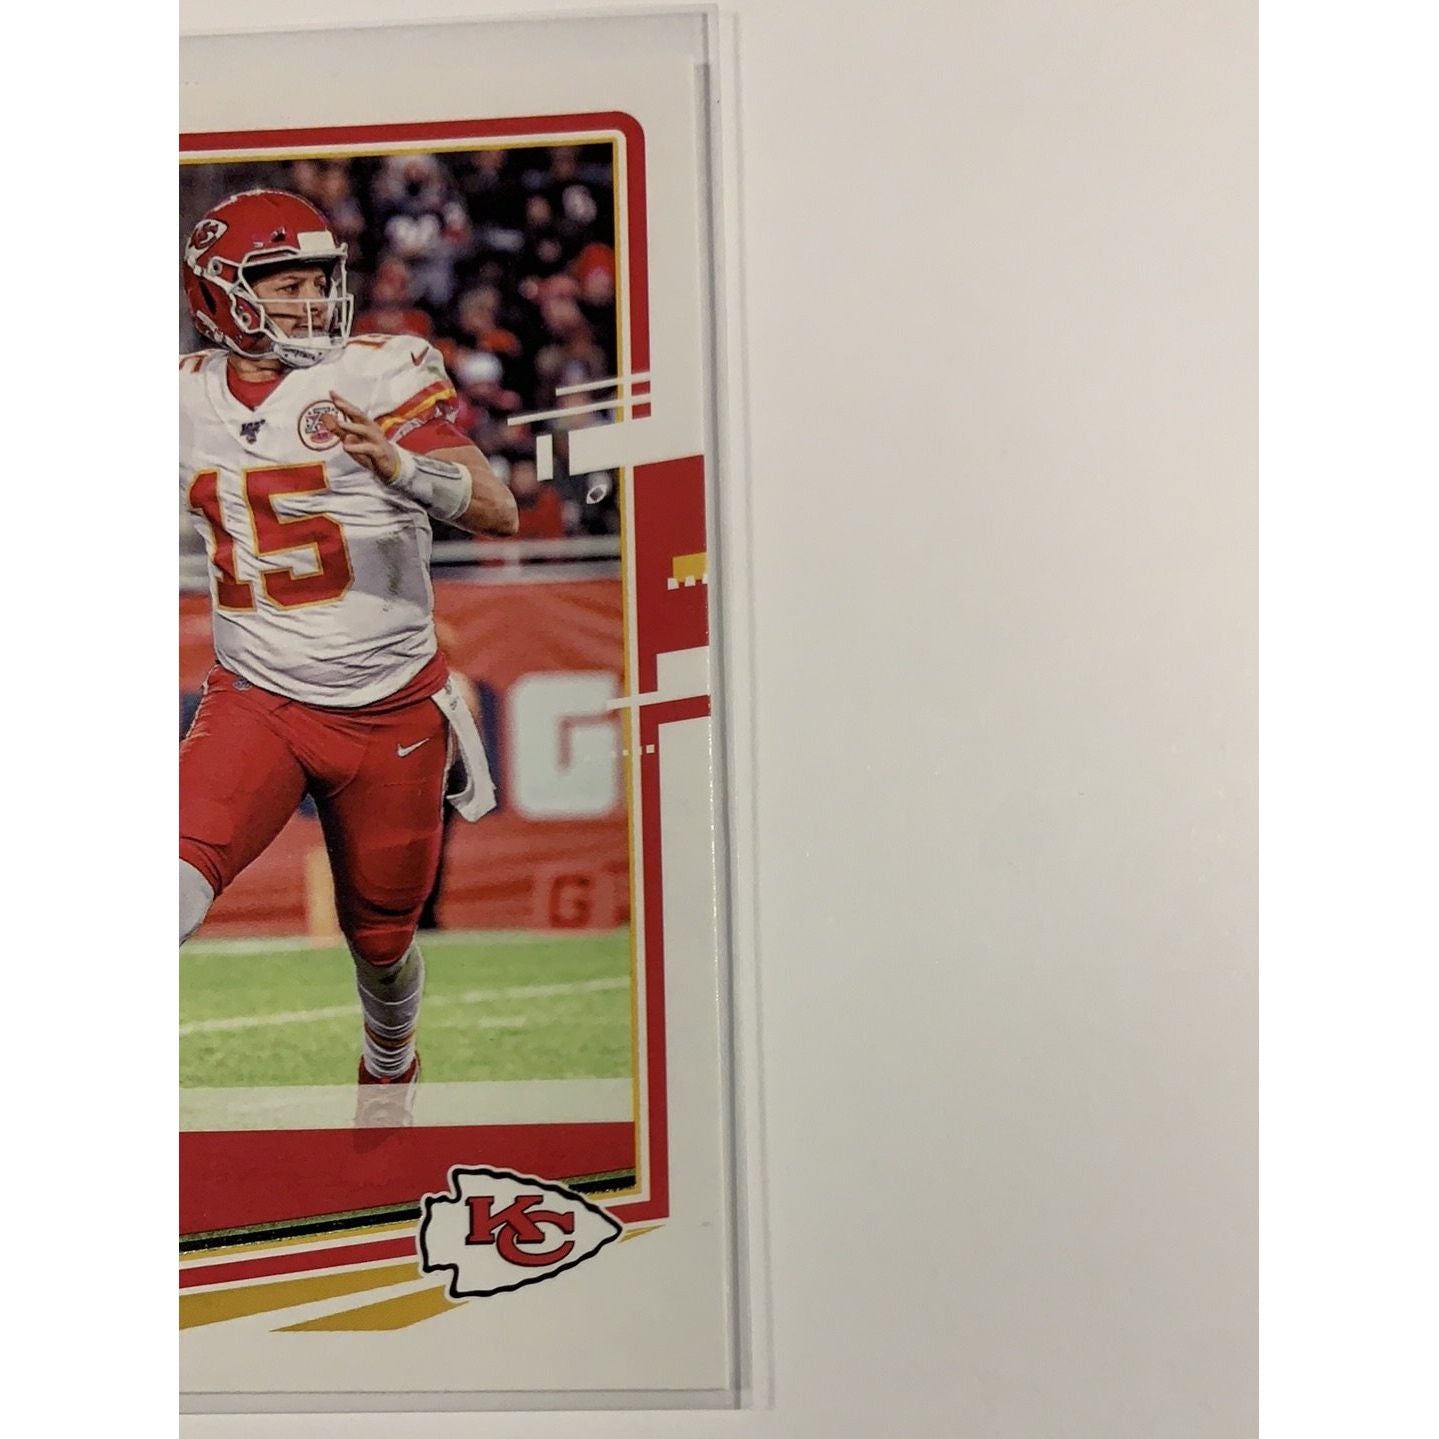  2020 Donruss Patrick Mahomes II Base #1  Local Legends Cards & Collectibles